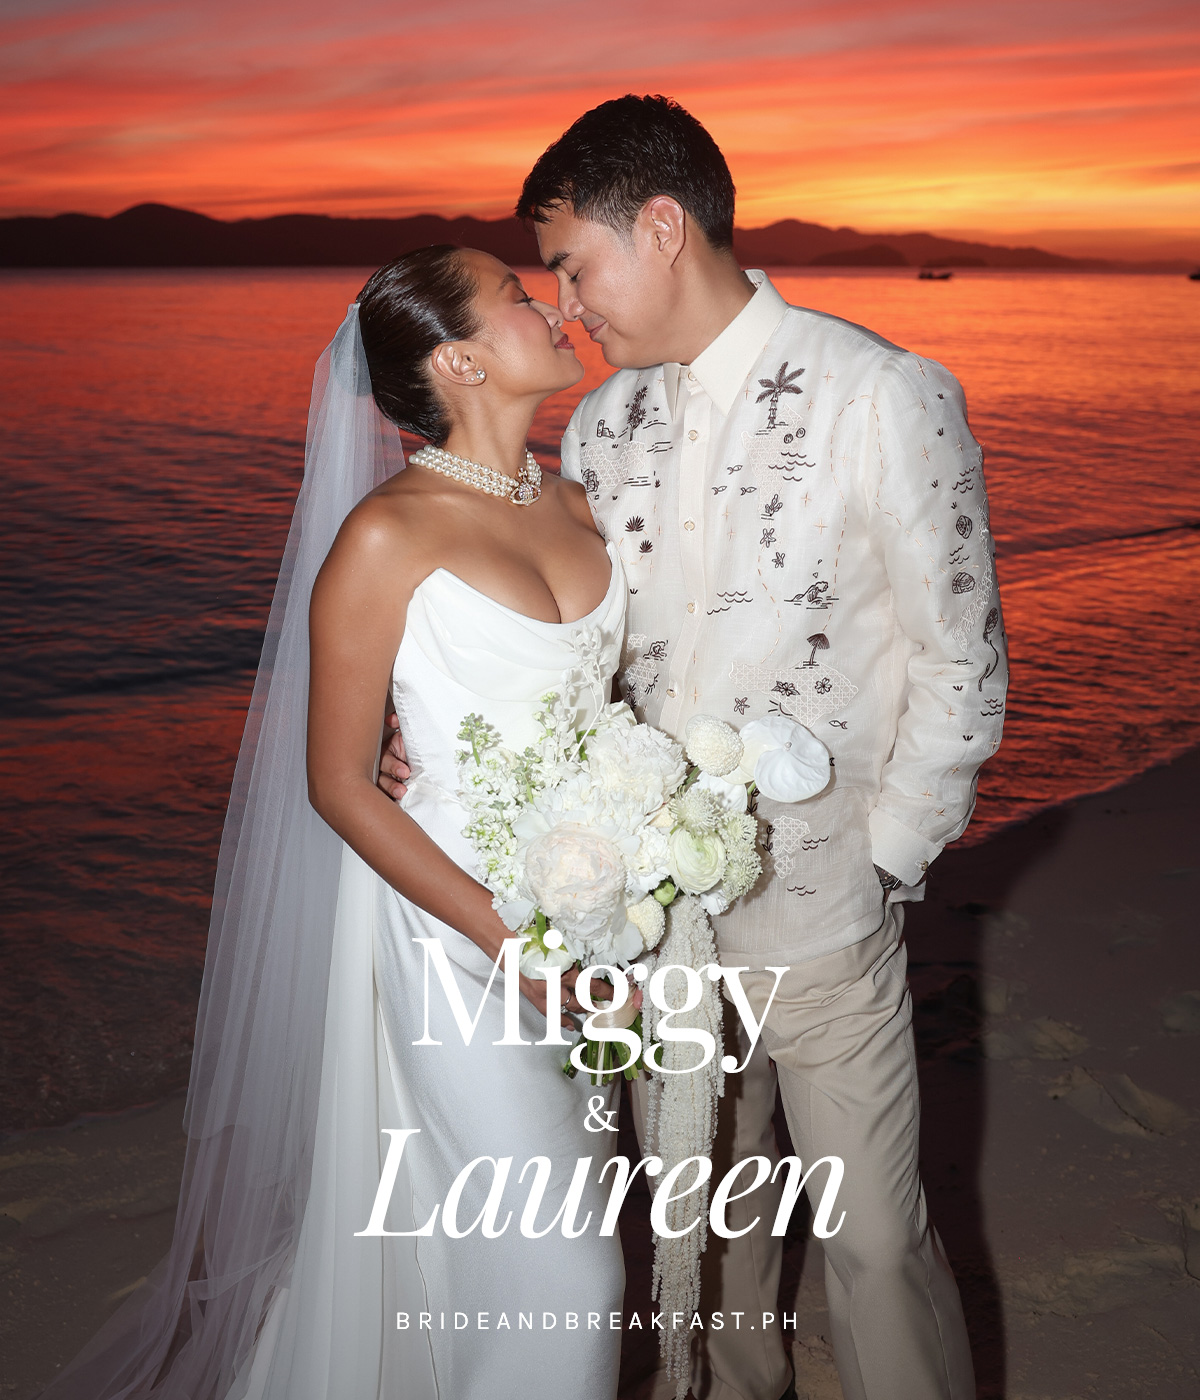 An Epic Party with Meaningful Details: Here Are Laureen Uy and Miggy Cruz' Official Wedding Photos! 